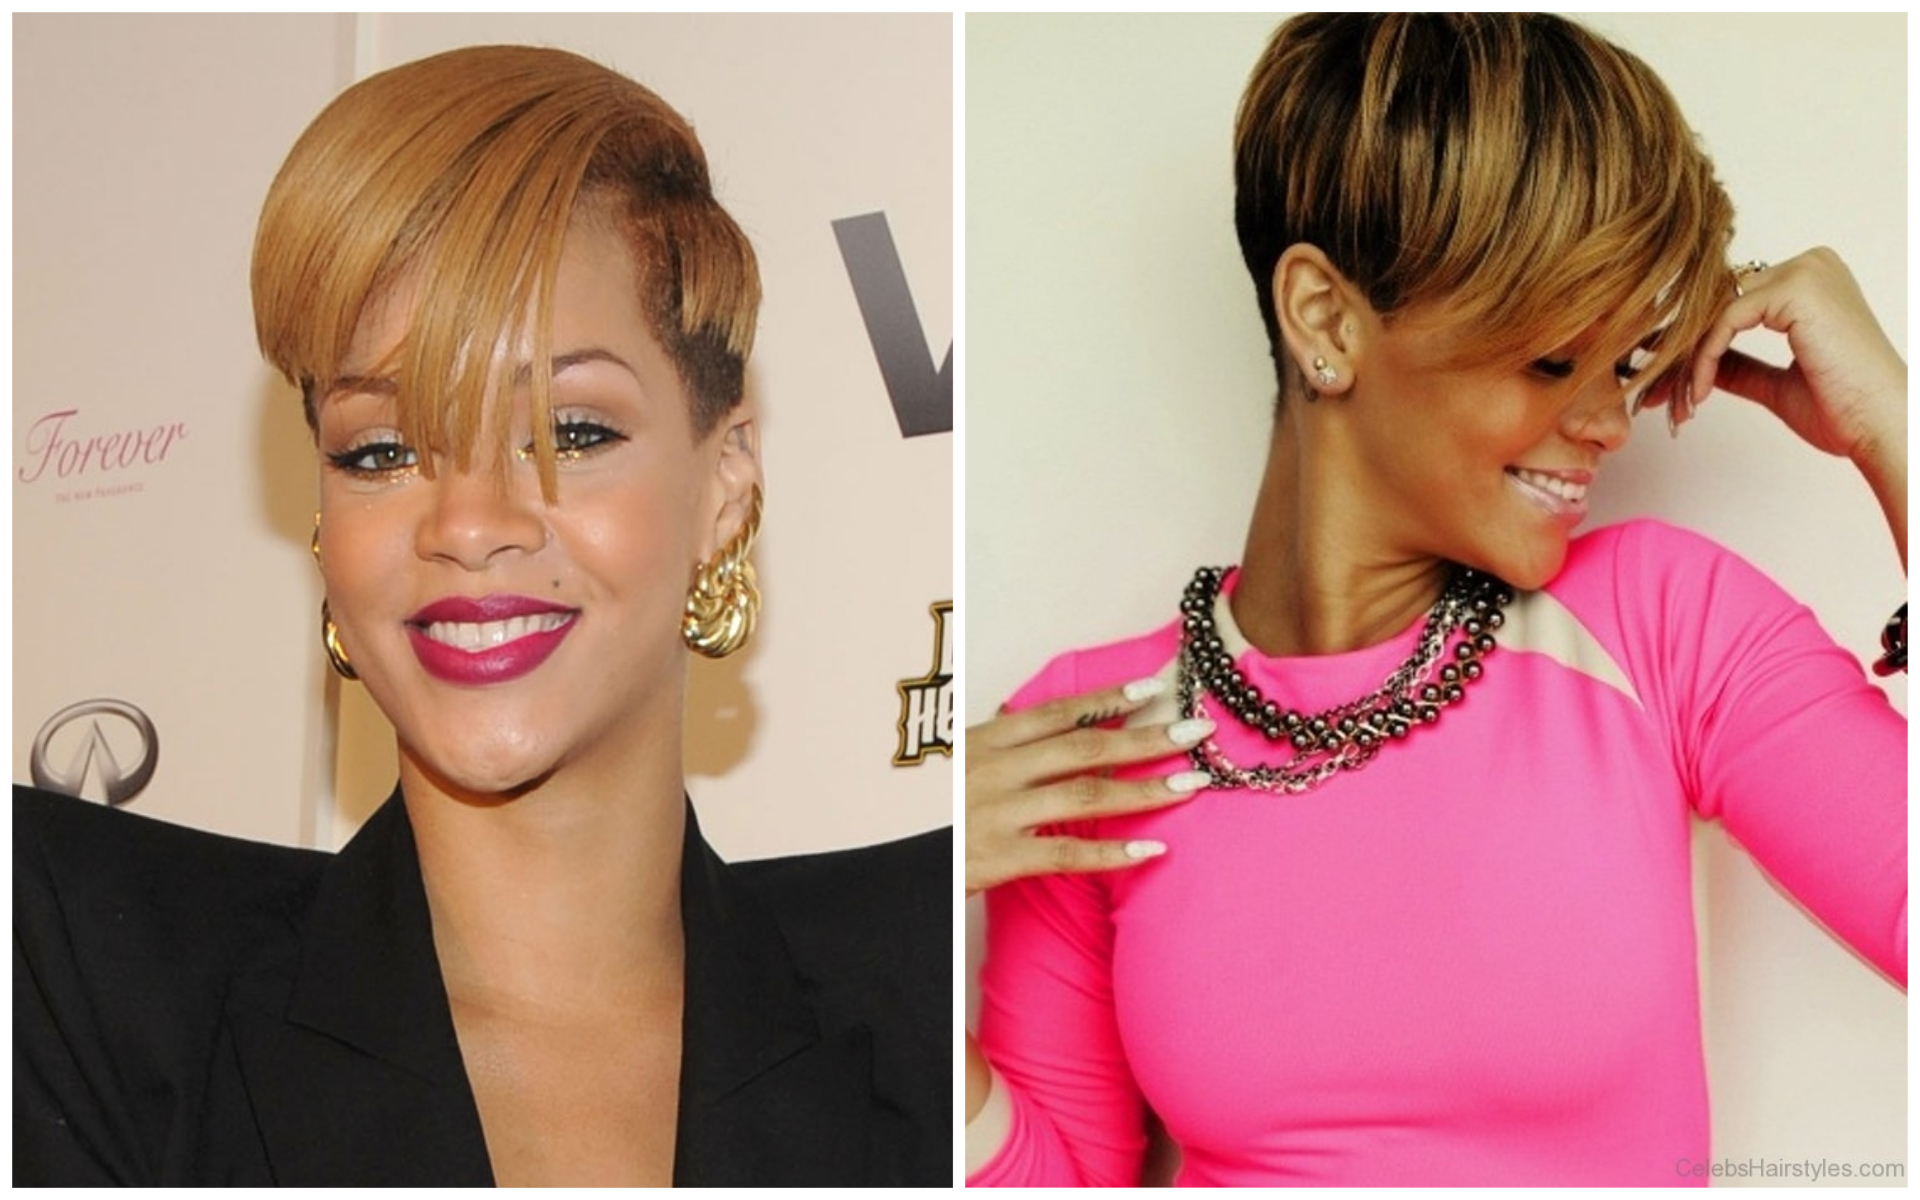 3. How to Get Rihanna's Short Blonde Hair Look - wide 4